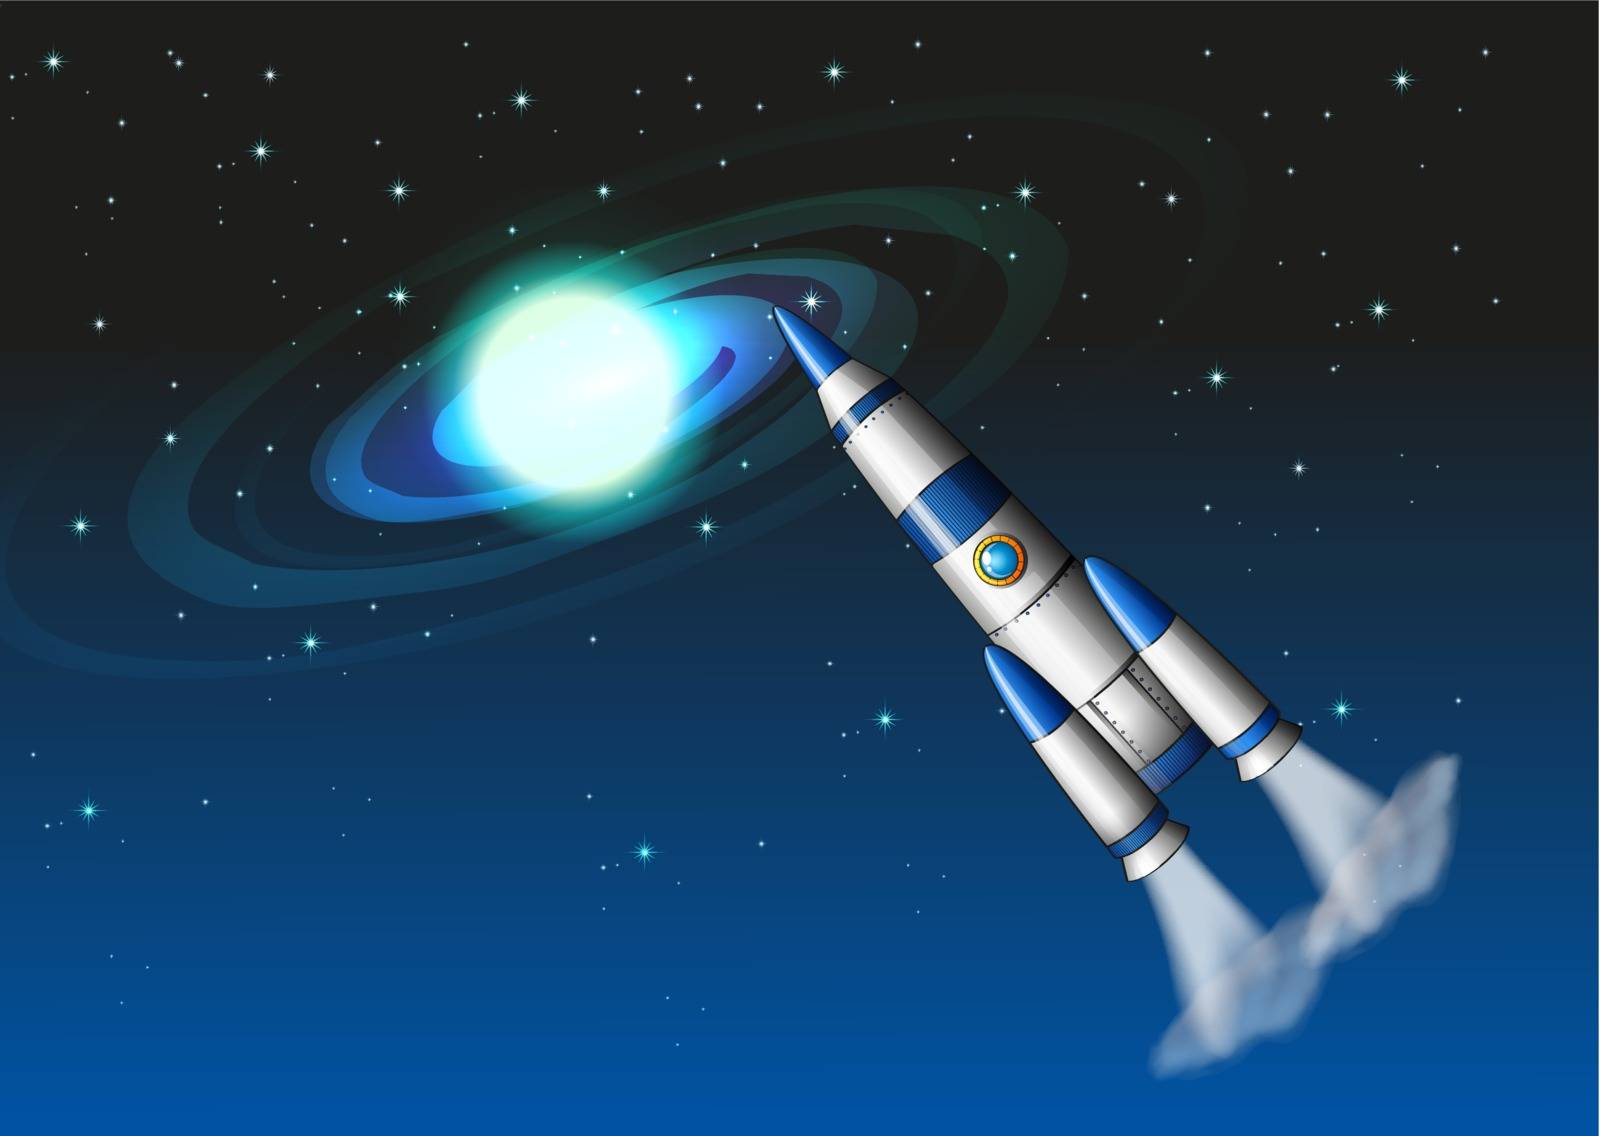 Illustration of a rocket in the sky